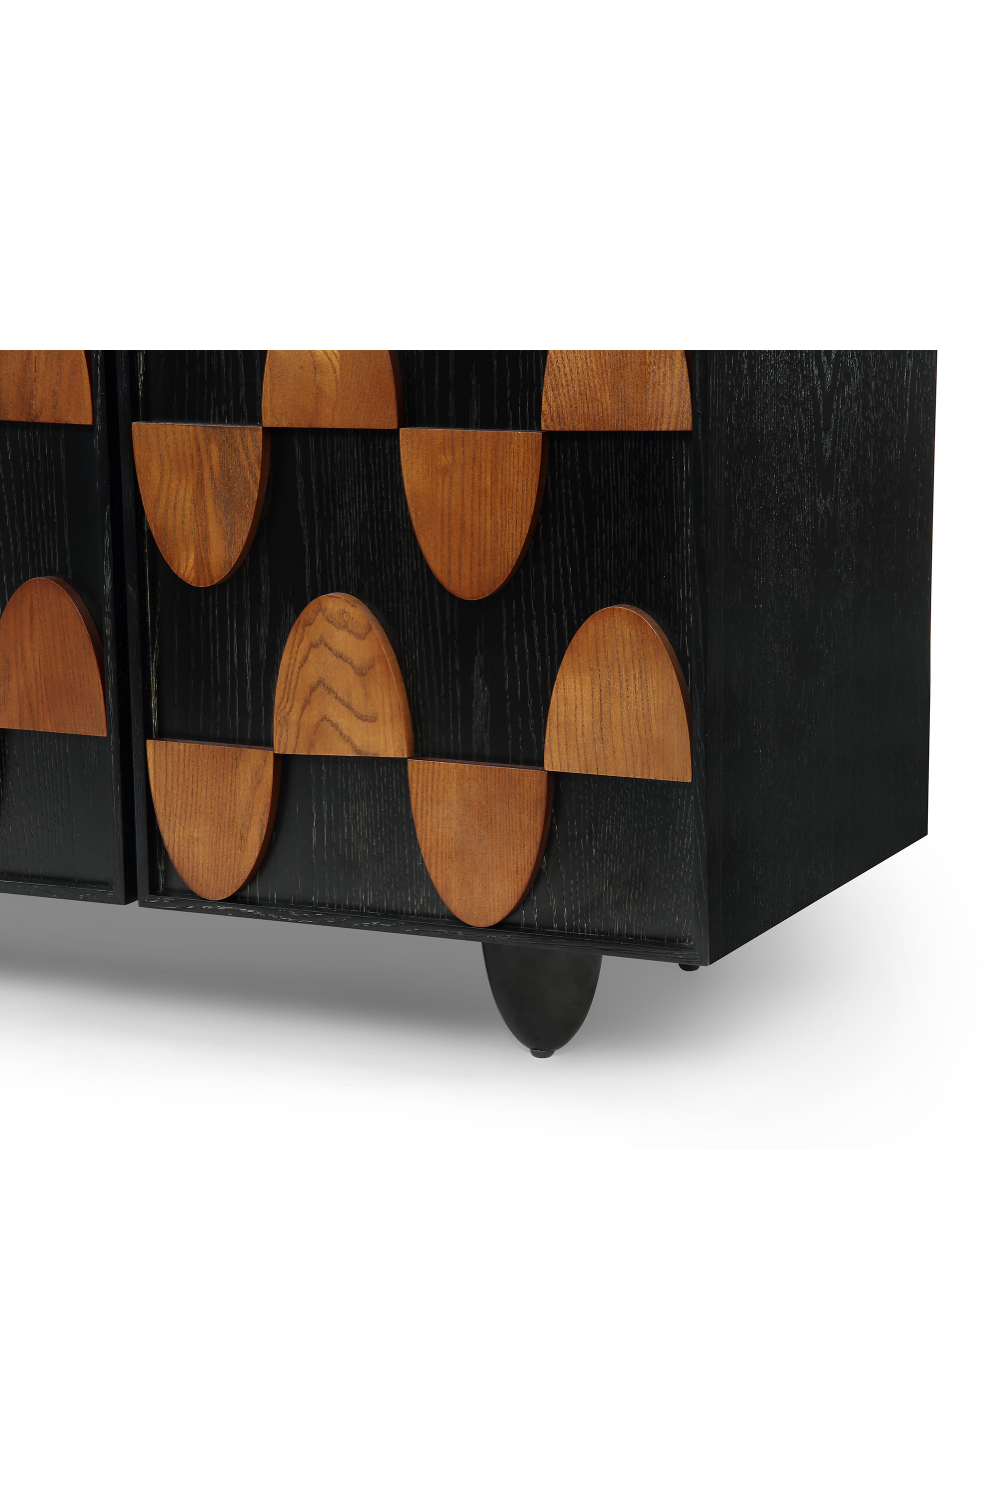 Ash Wood Contemporary Sideboard | Liang & Eimil Mansour | Oroa.com